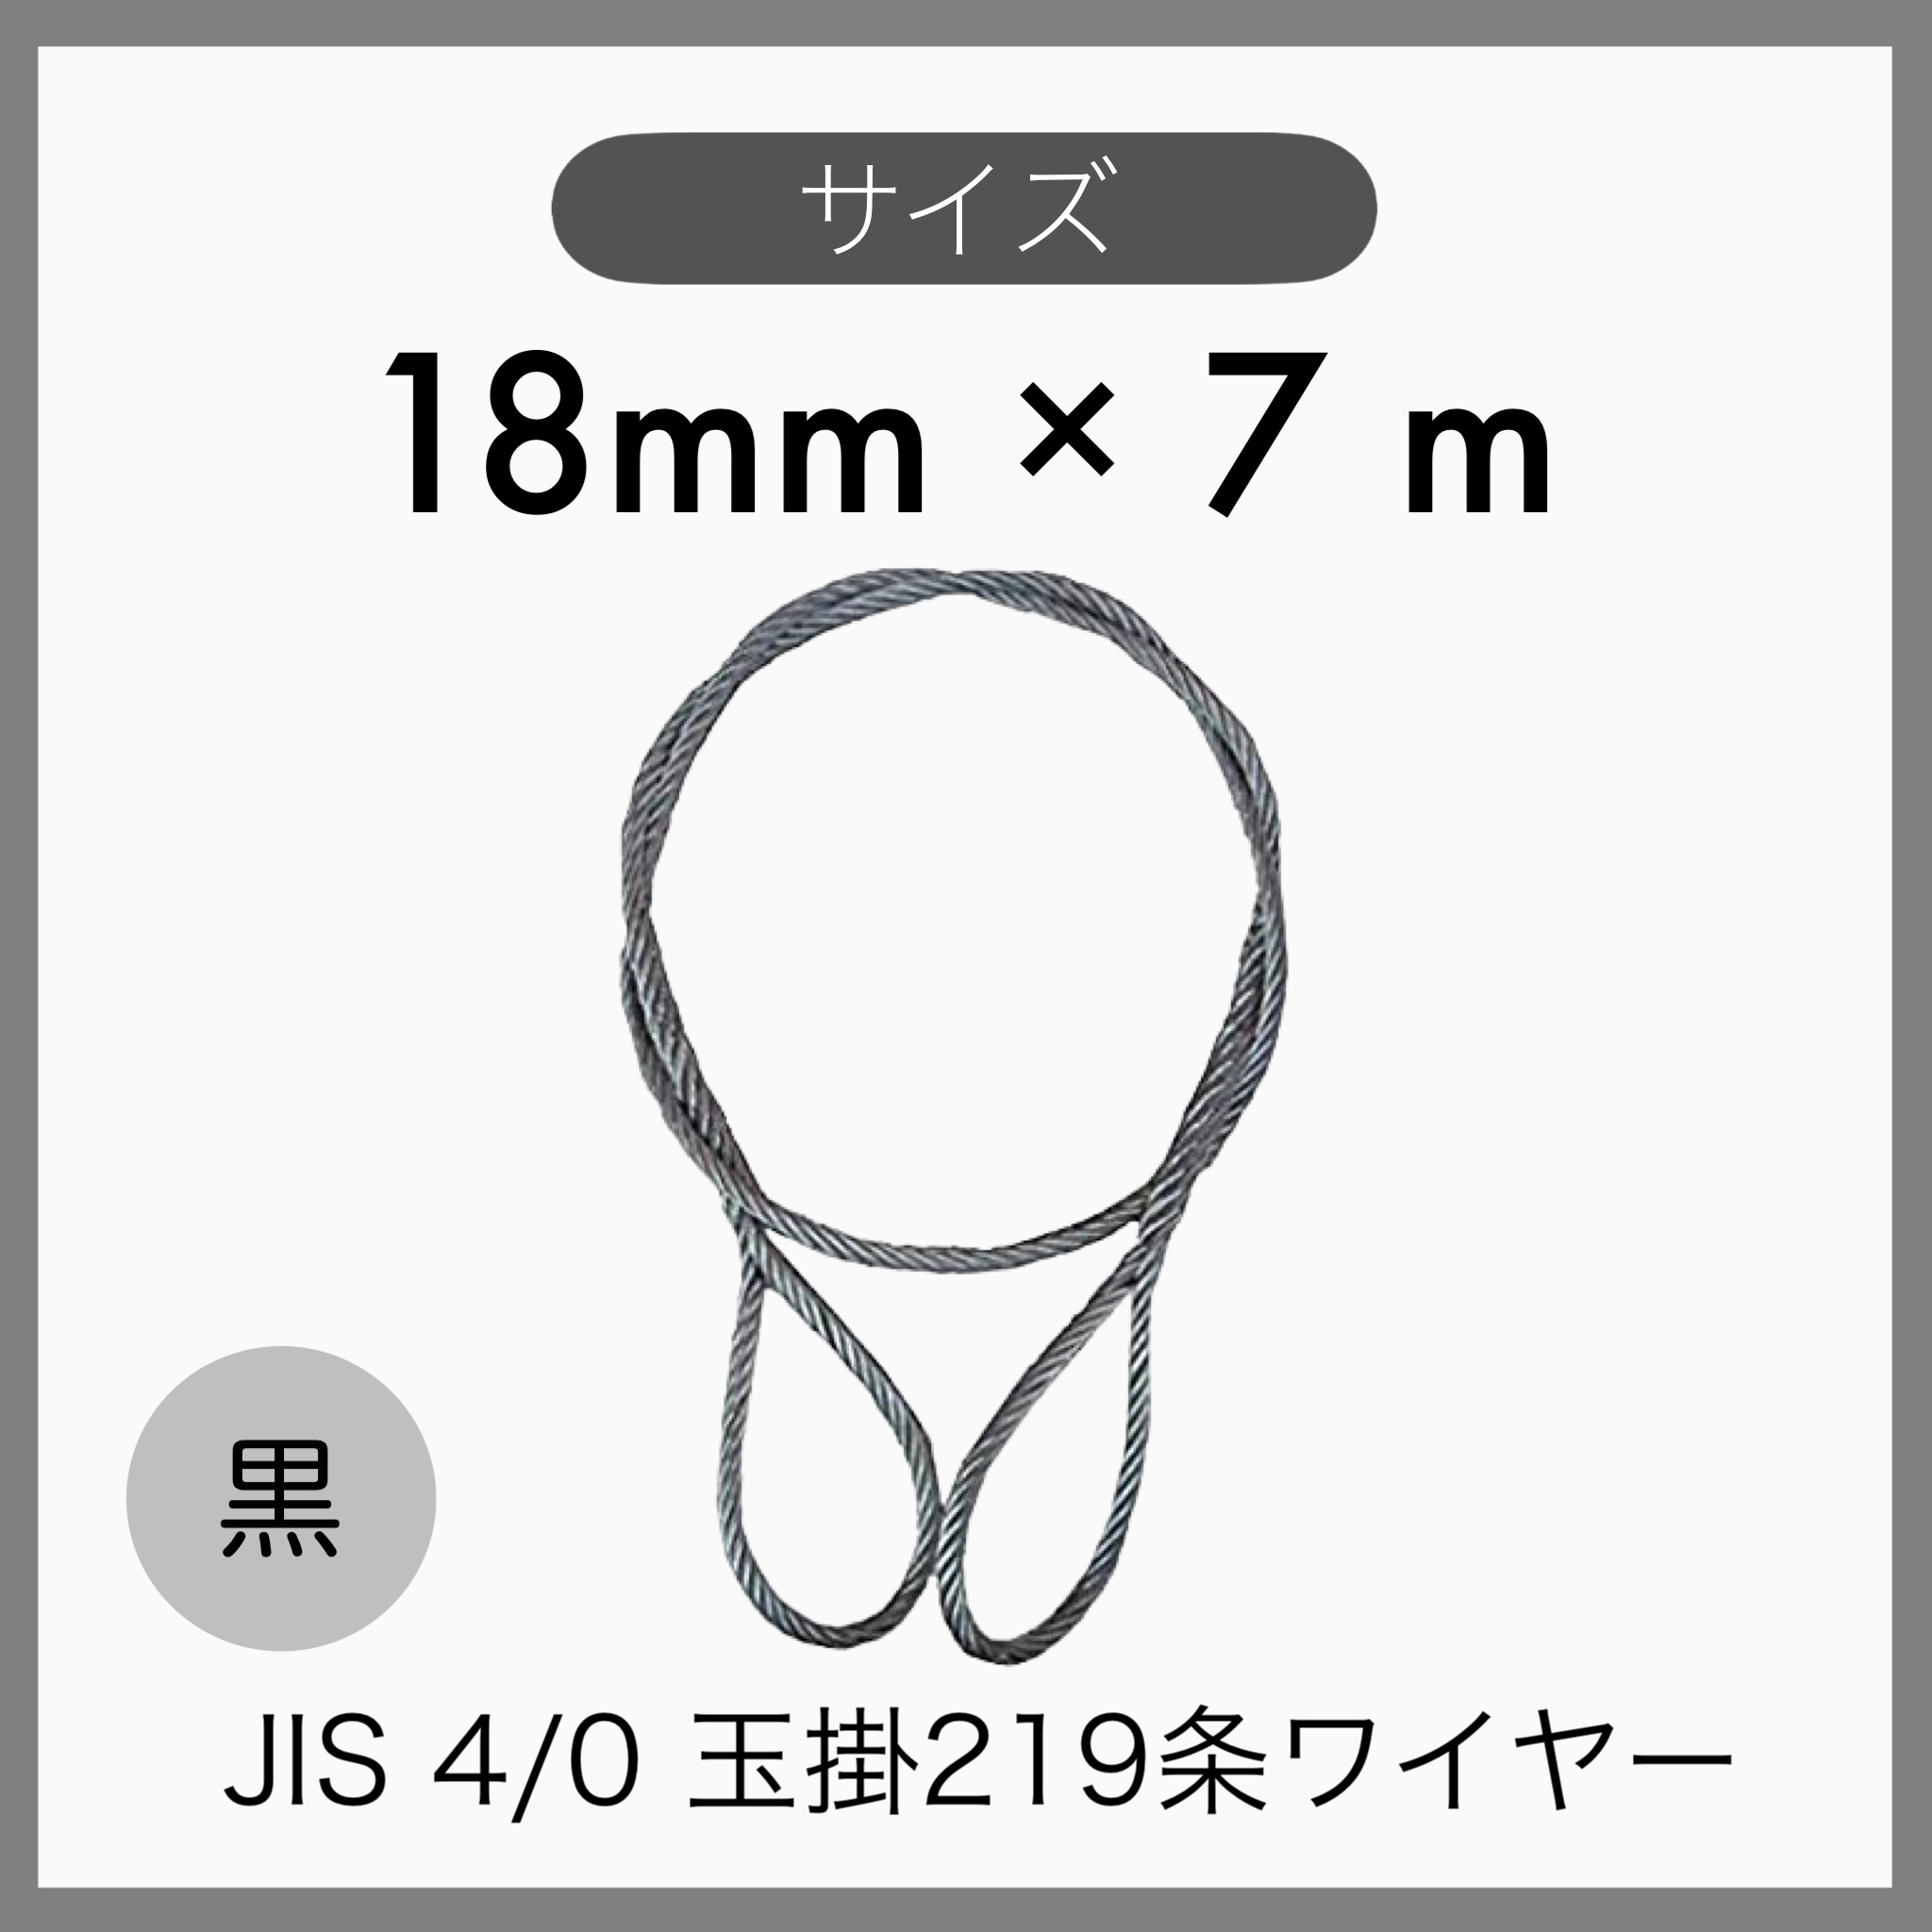 5 pcs set JIS O/O black sphere .. wire sphere ..219 article wire knitting imported goods 18mm×7m